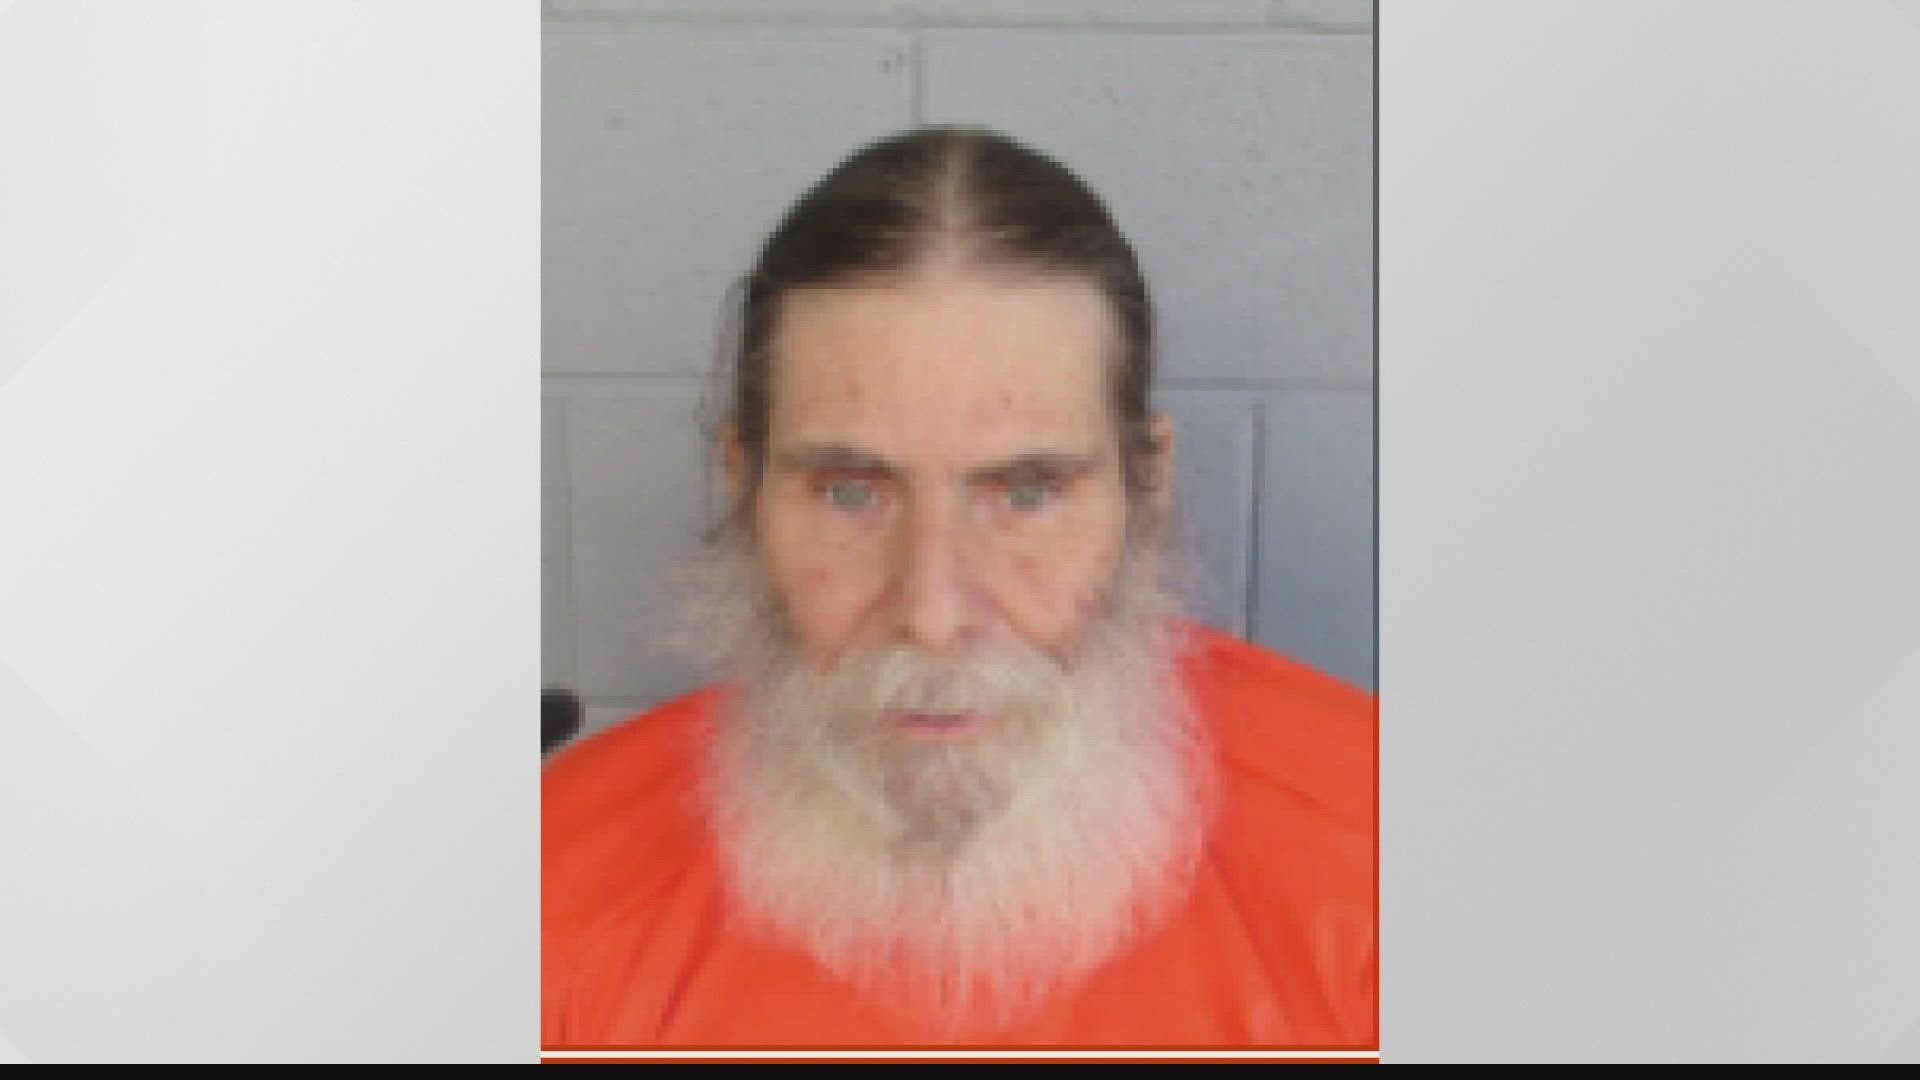 The request on behalf of Frank Atwood, convicted in the killing of Vicki Hoskinson, was denied Friday by the U.S. 9th Circuit Court of Appeals.